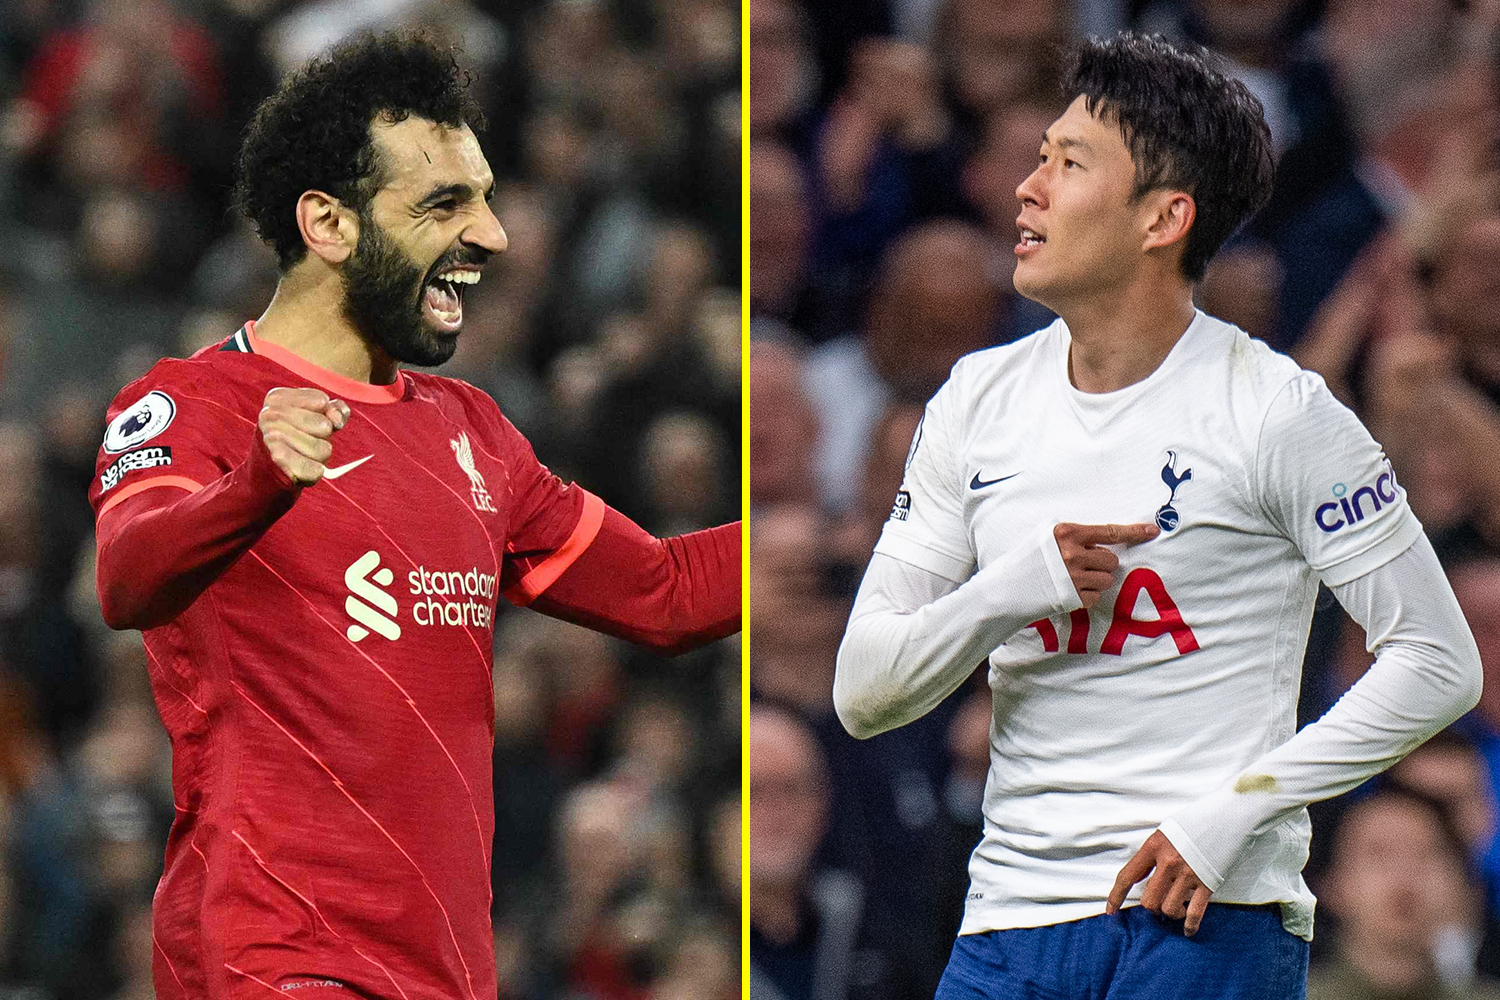 Premier League 2021/22: Tottenham's Son Heung-min becomes first Asian to win Premier League's Golden Boot, shares award with Mohamed Salah